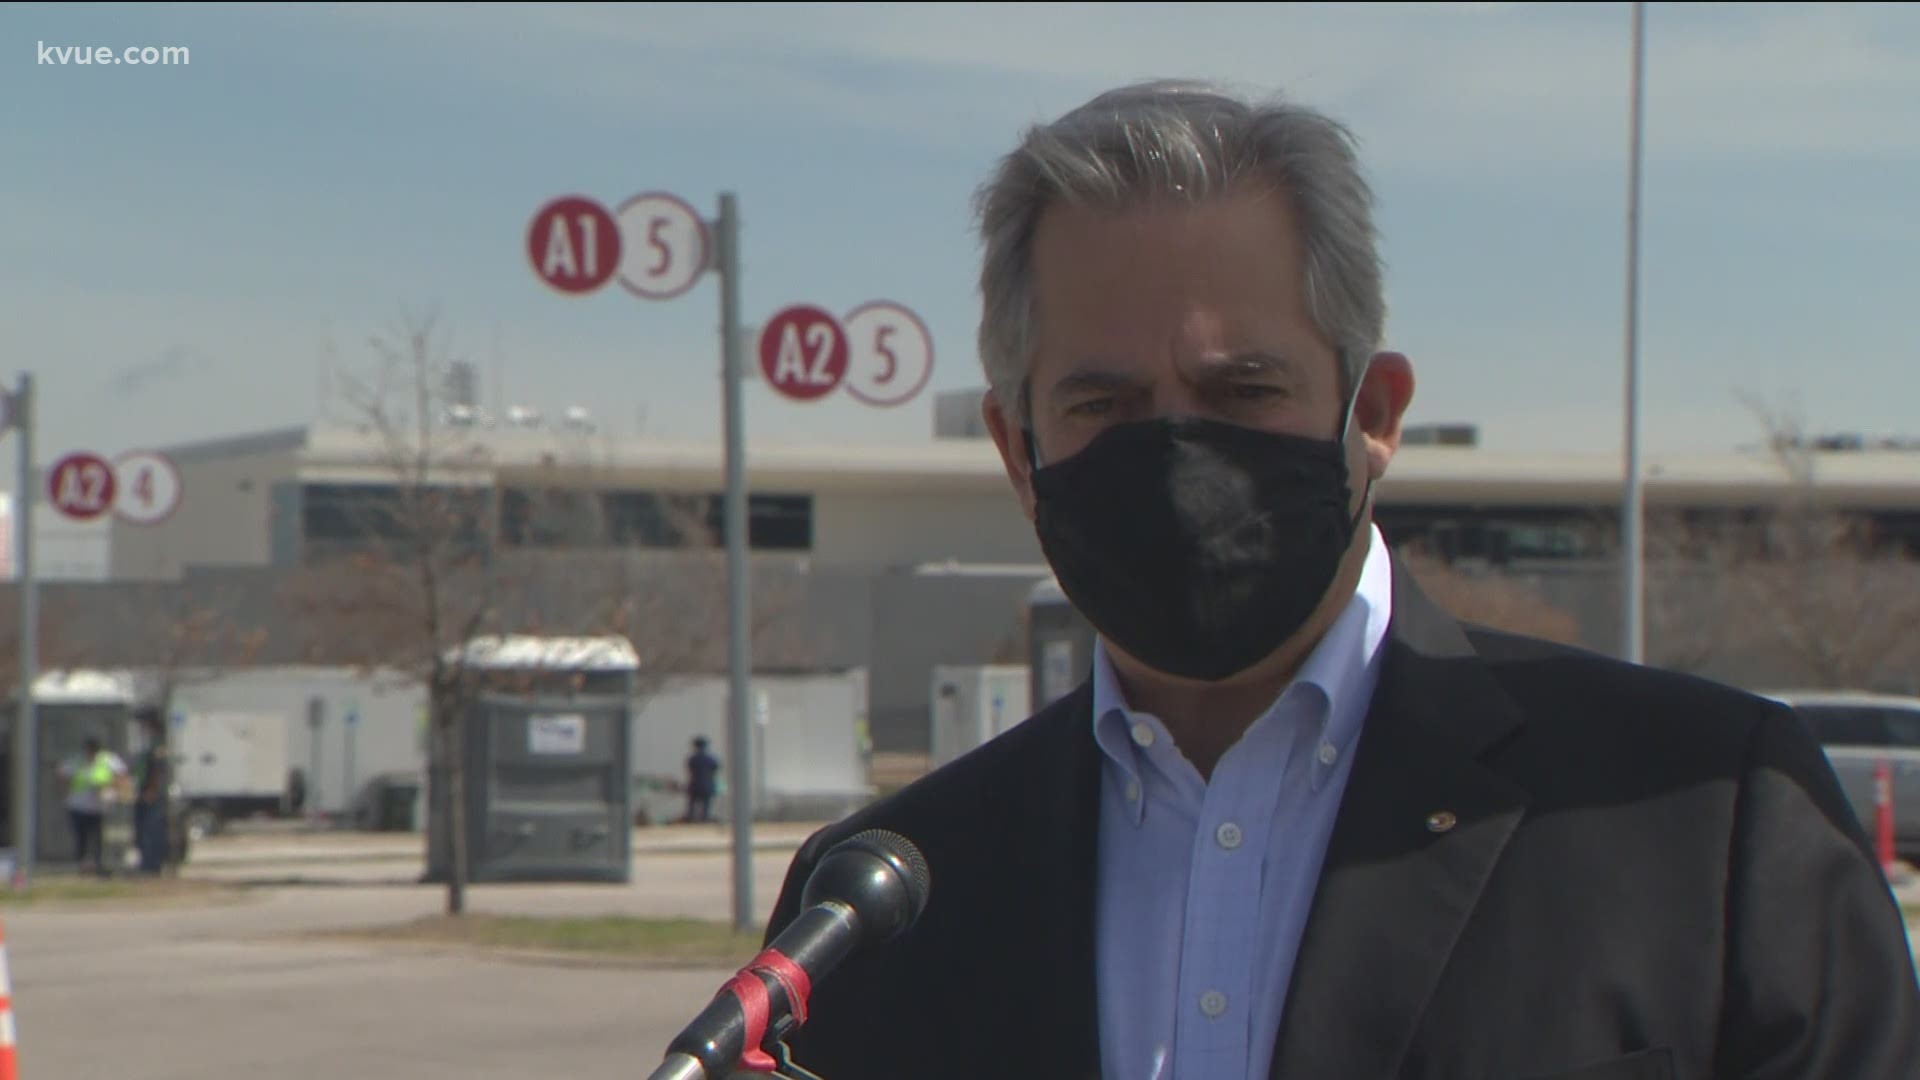 Several Central Texas counties pooled their resources and are working to vaccinate 10,000 people at the Circuit of the Americas.